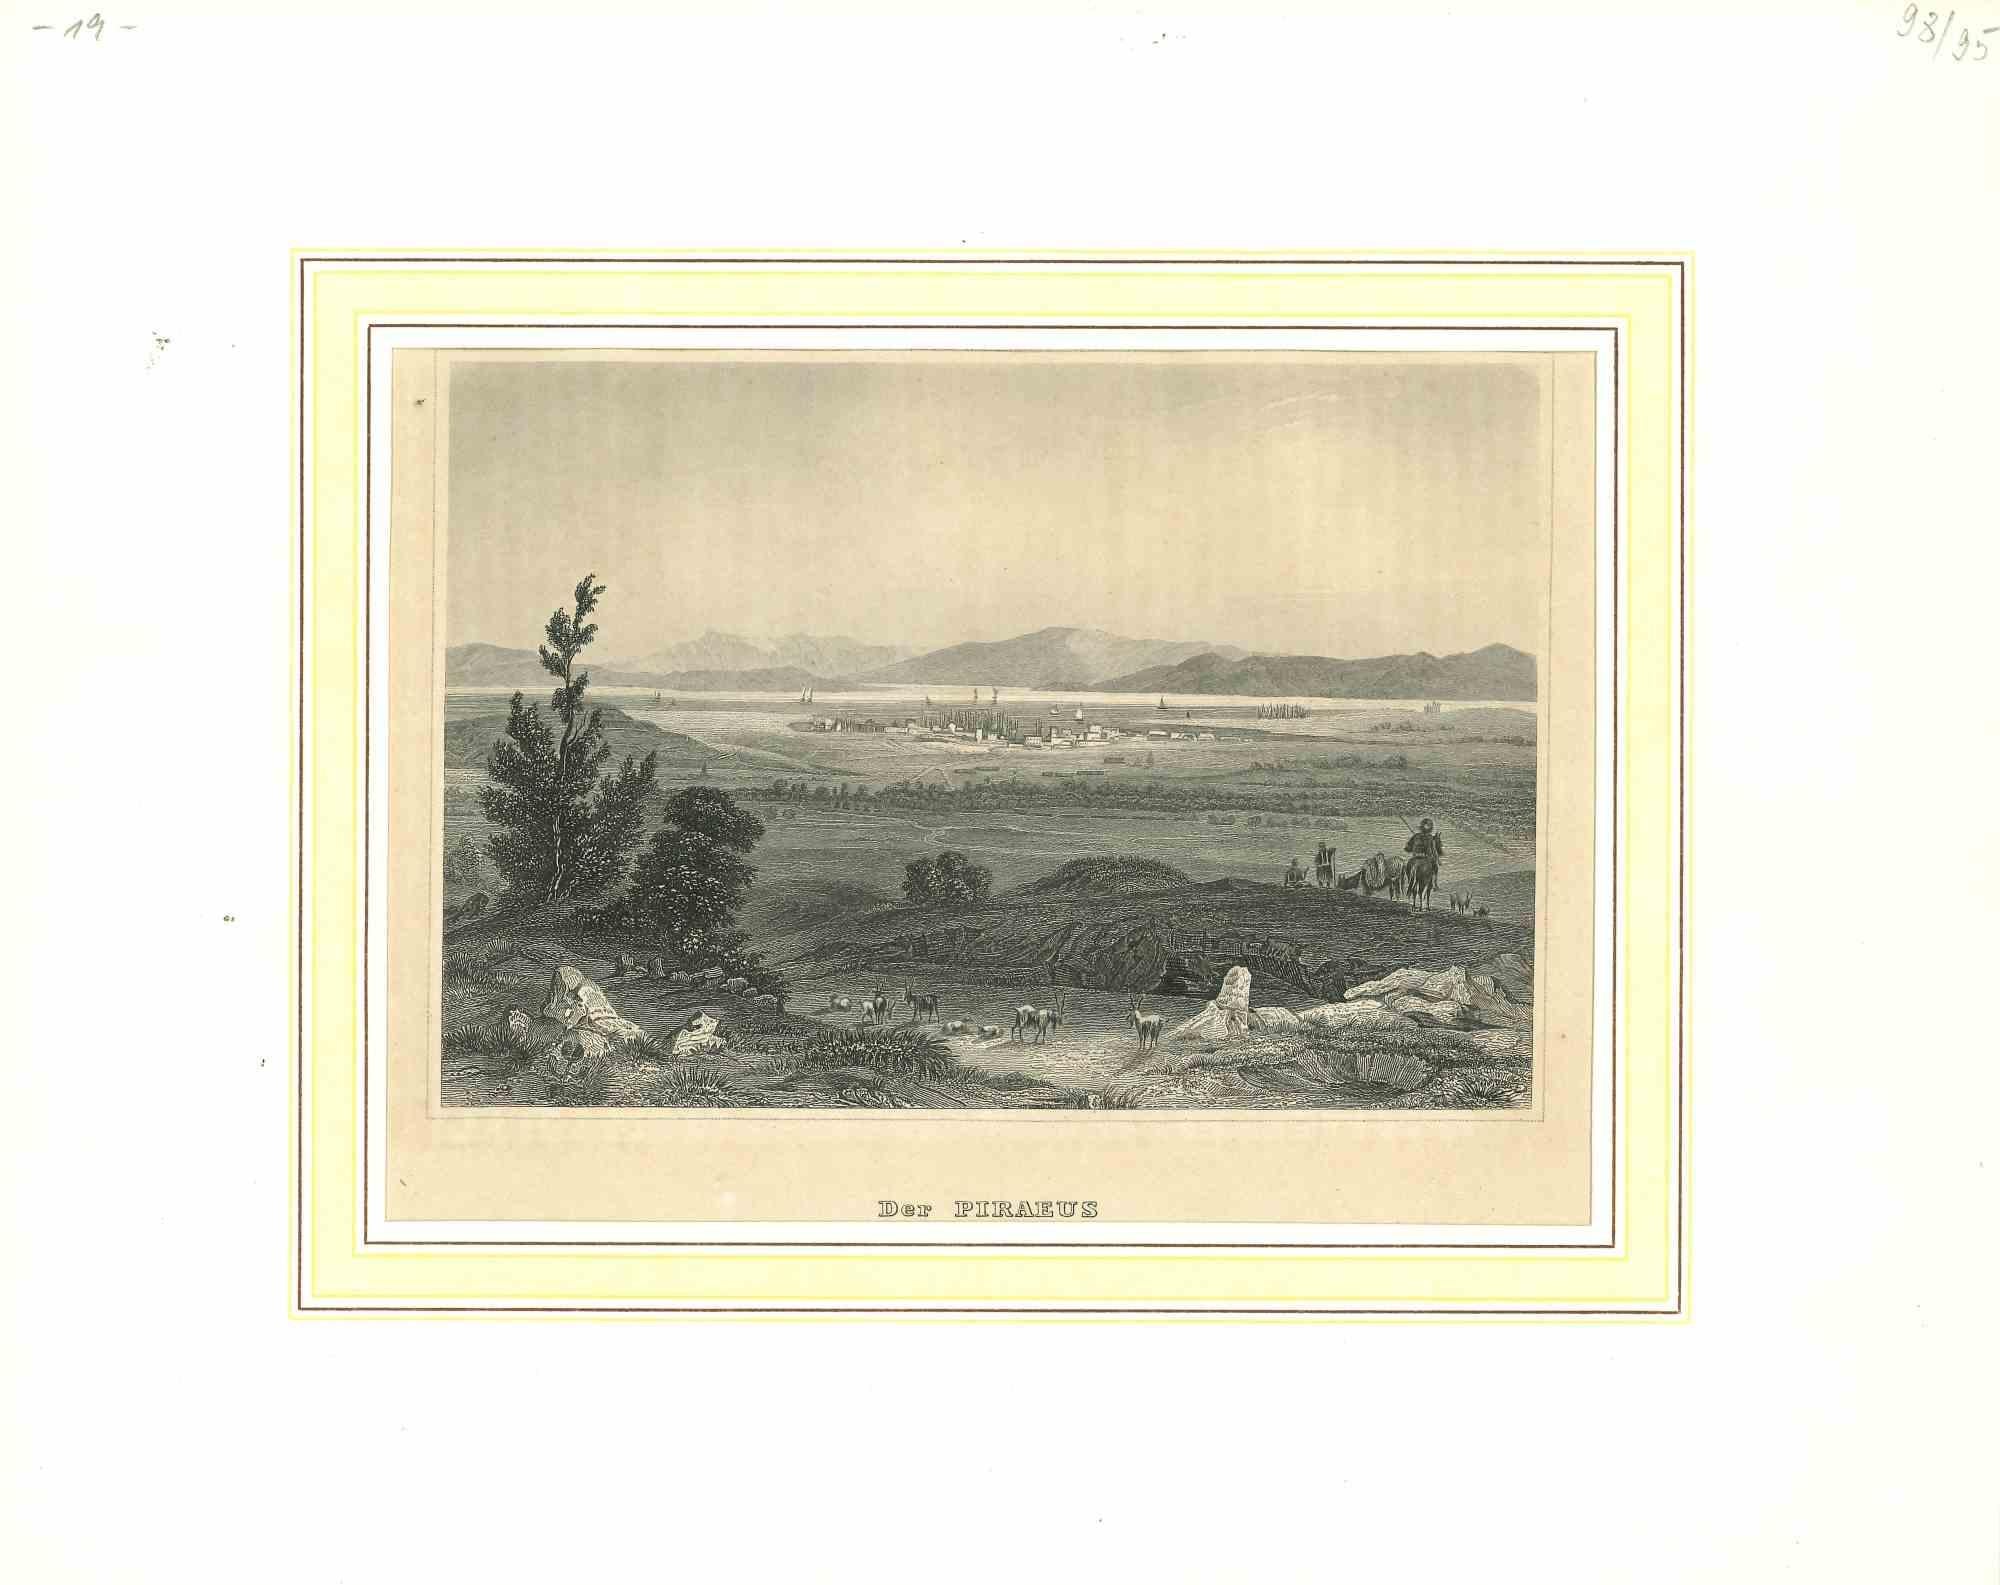 Unknown Landscape Print - Ancient View of the Piraeus -  Lithograph - Mid-19th Century